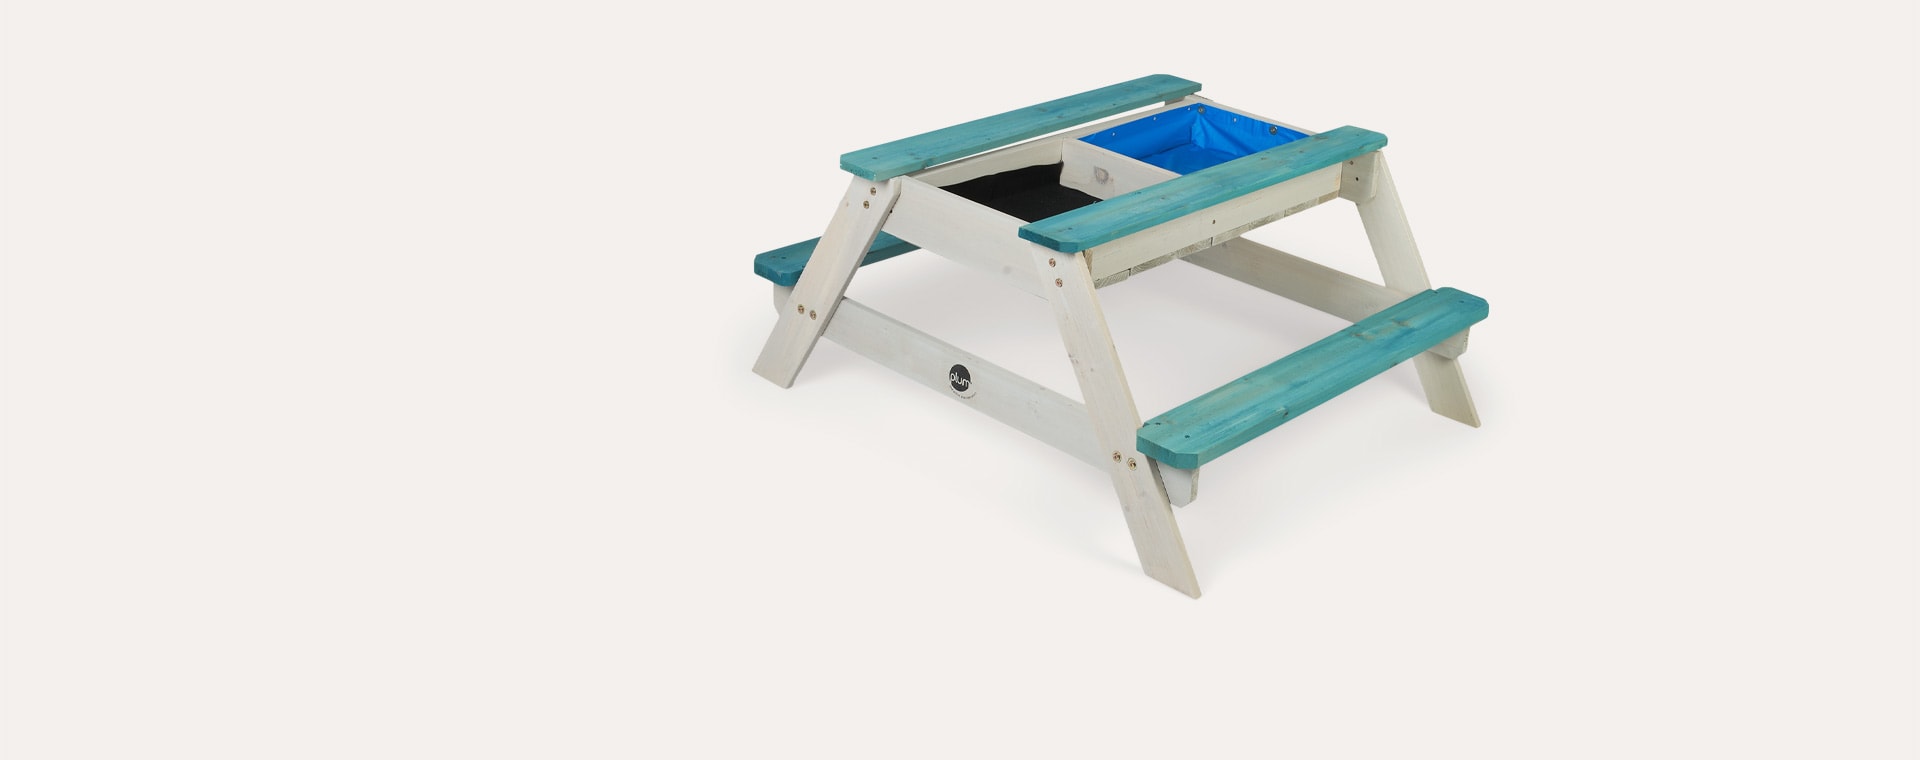 Buy the Plum Surfside Sand & Water Table at KIDLY UK